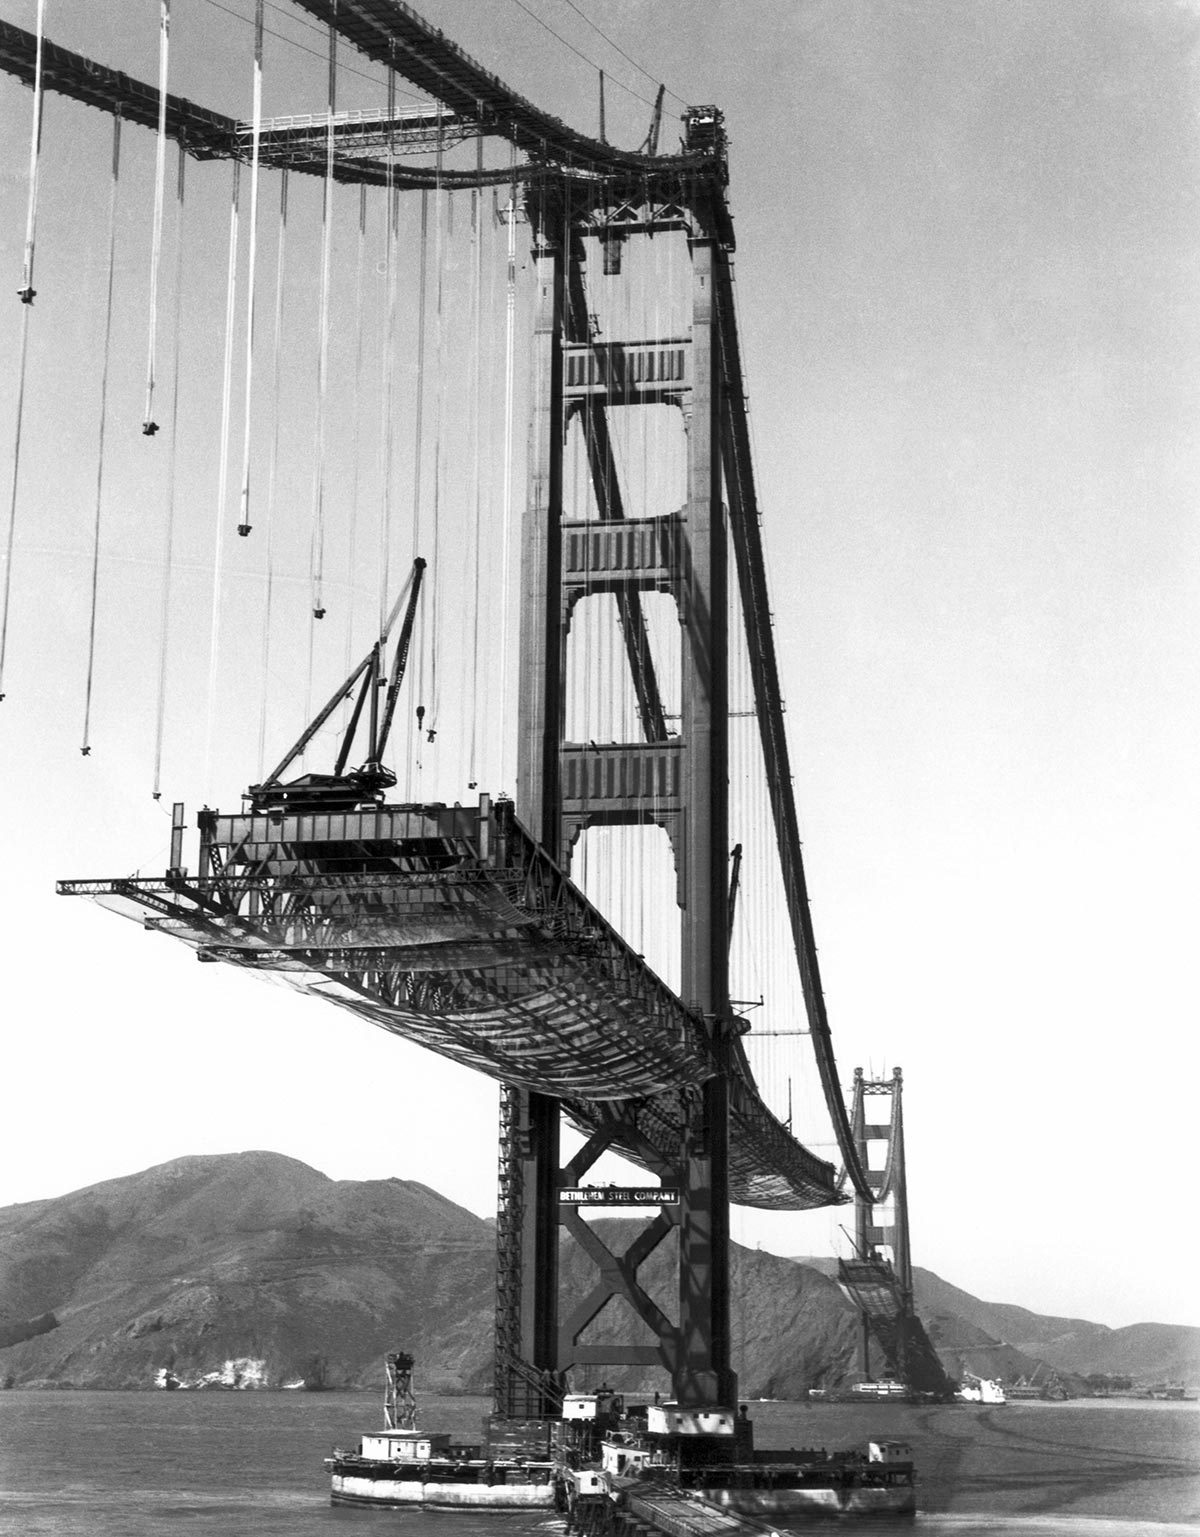 VARIOUS San Francisco, California: October 16, 1936. The Golden Gate Bridge under construction, with the roadbed being suspended from the cables.